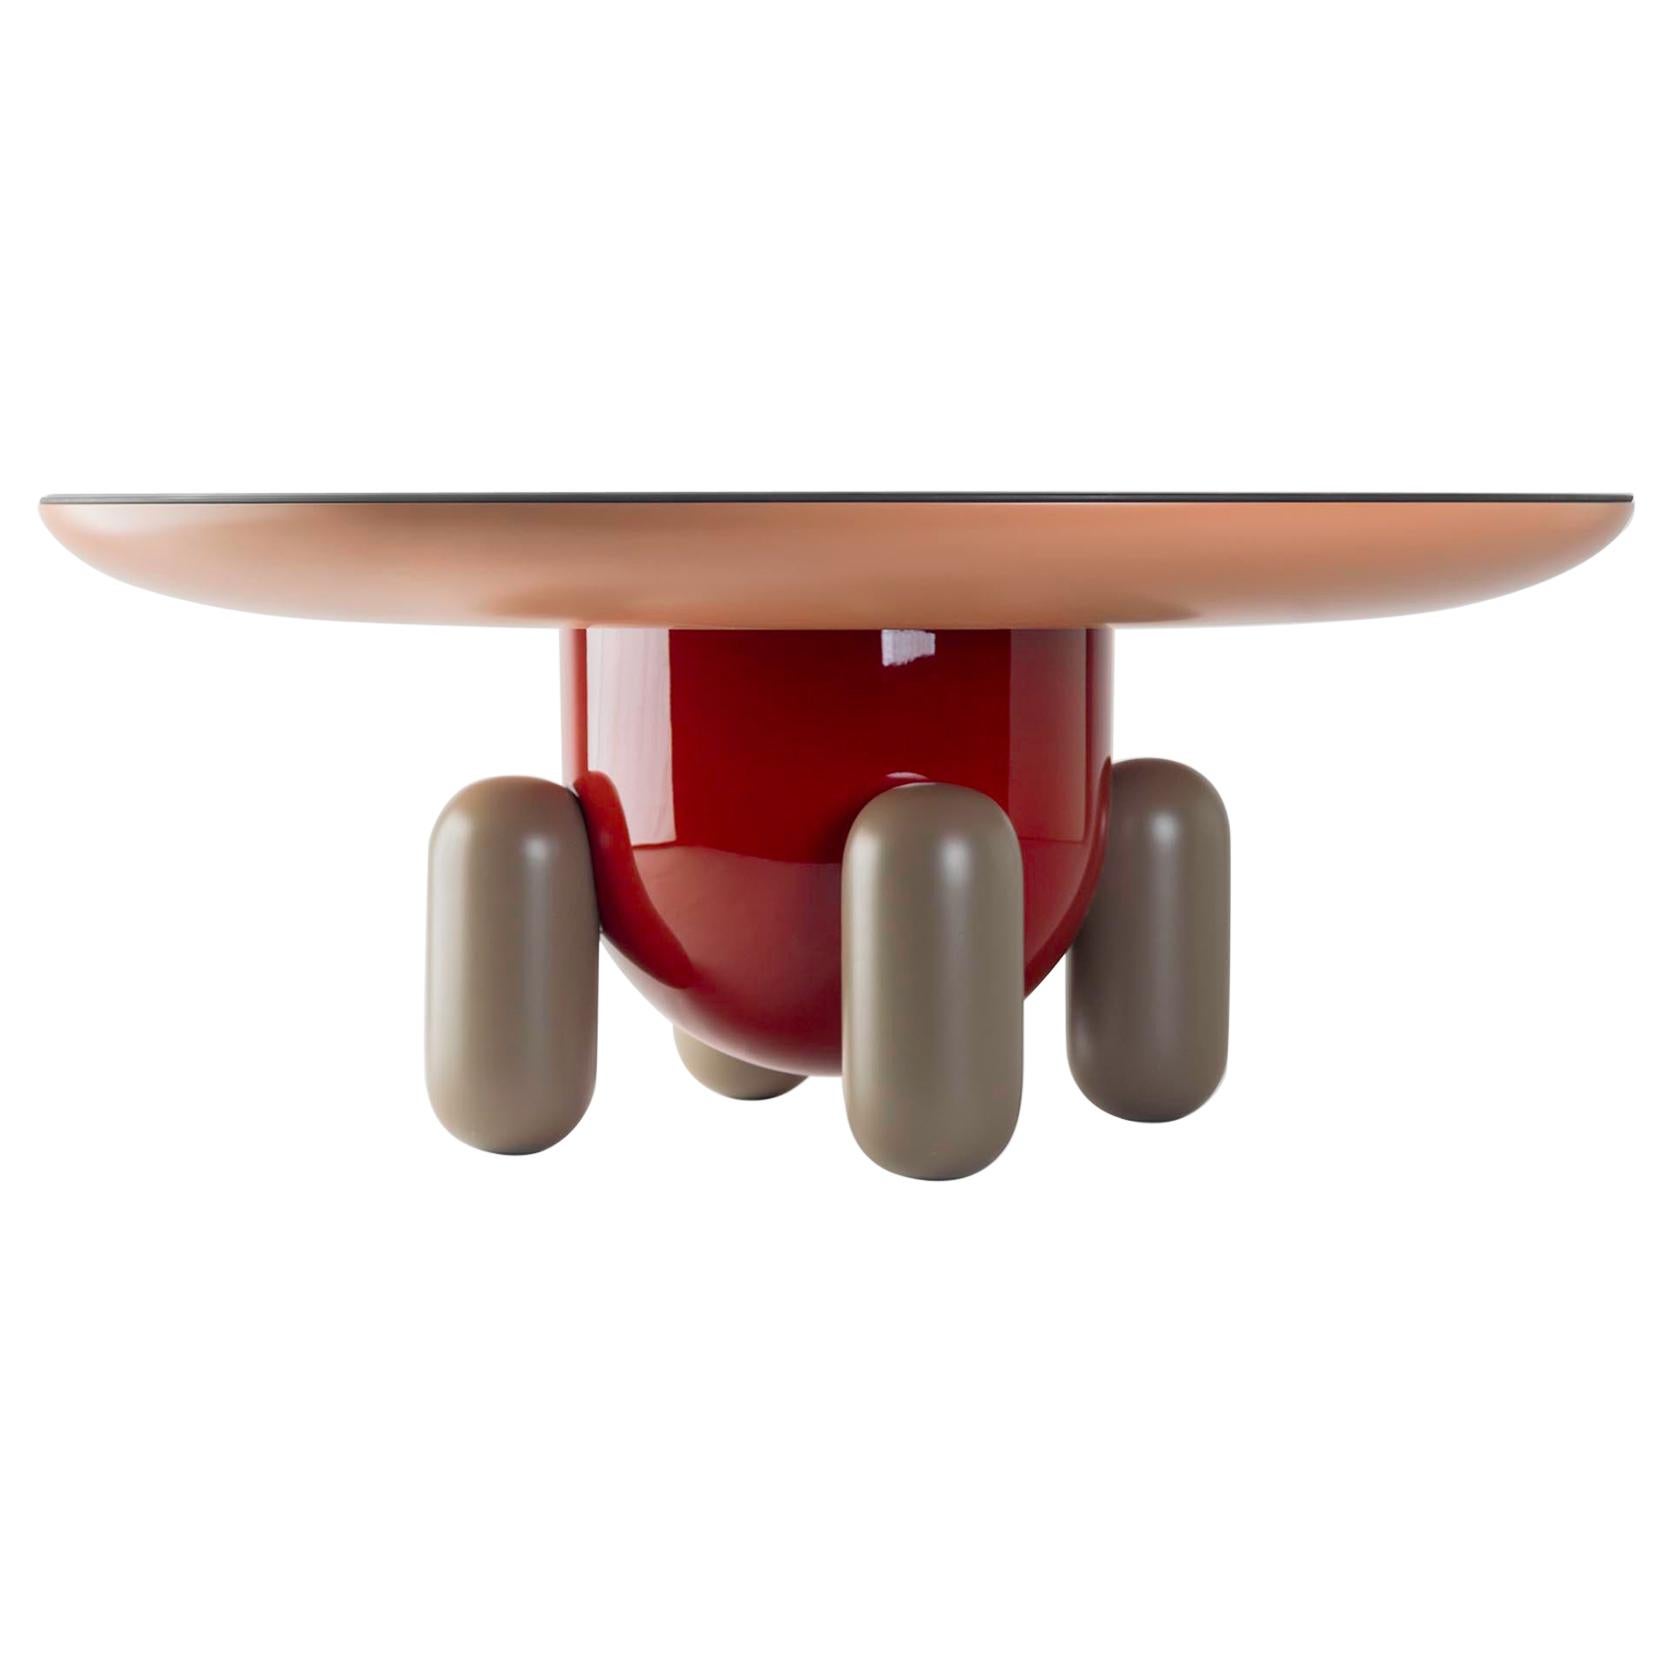 Round Coffee table by Jaime Hayon, "Explorer" series, red lacquered fibreglass 